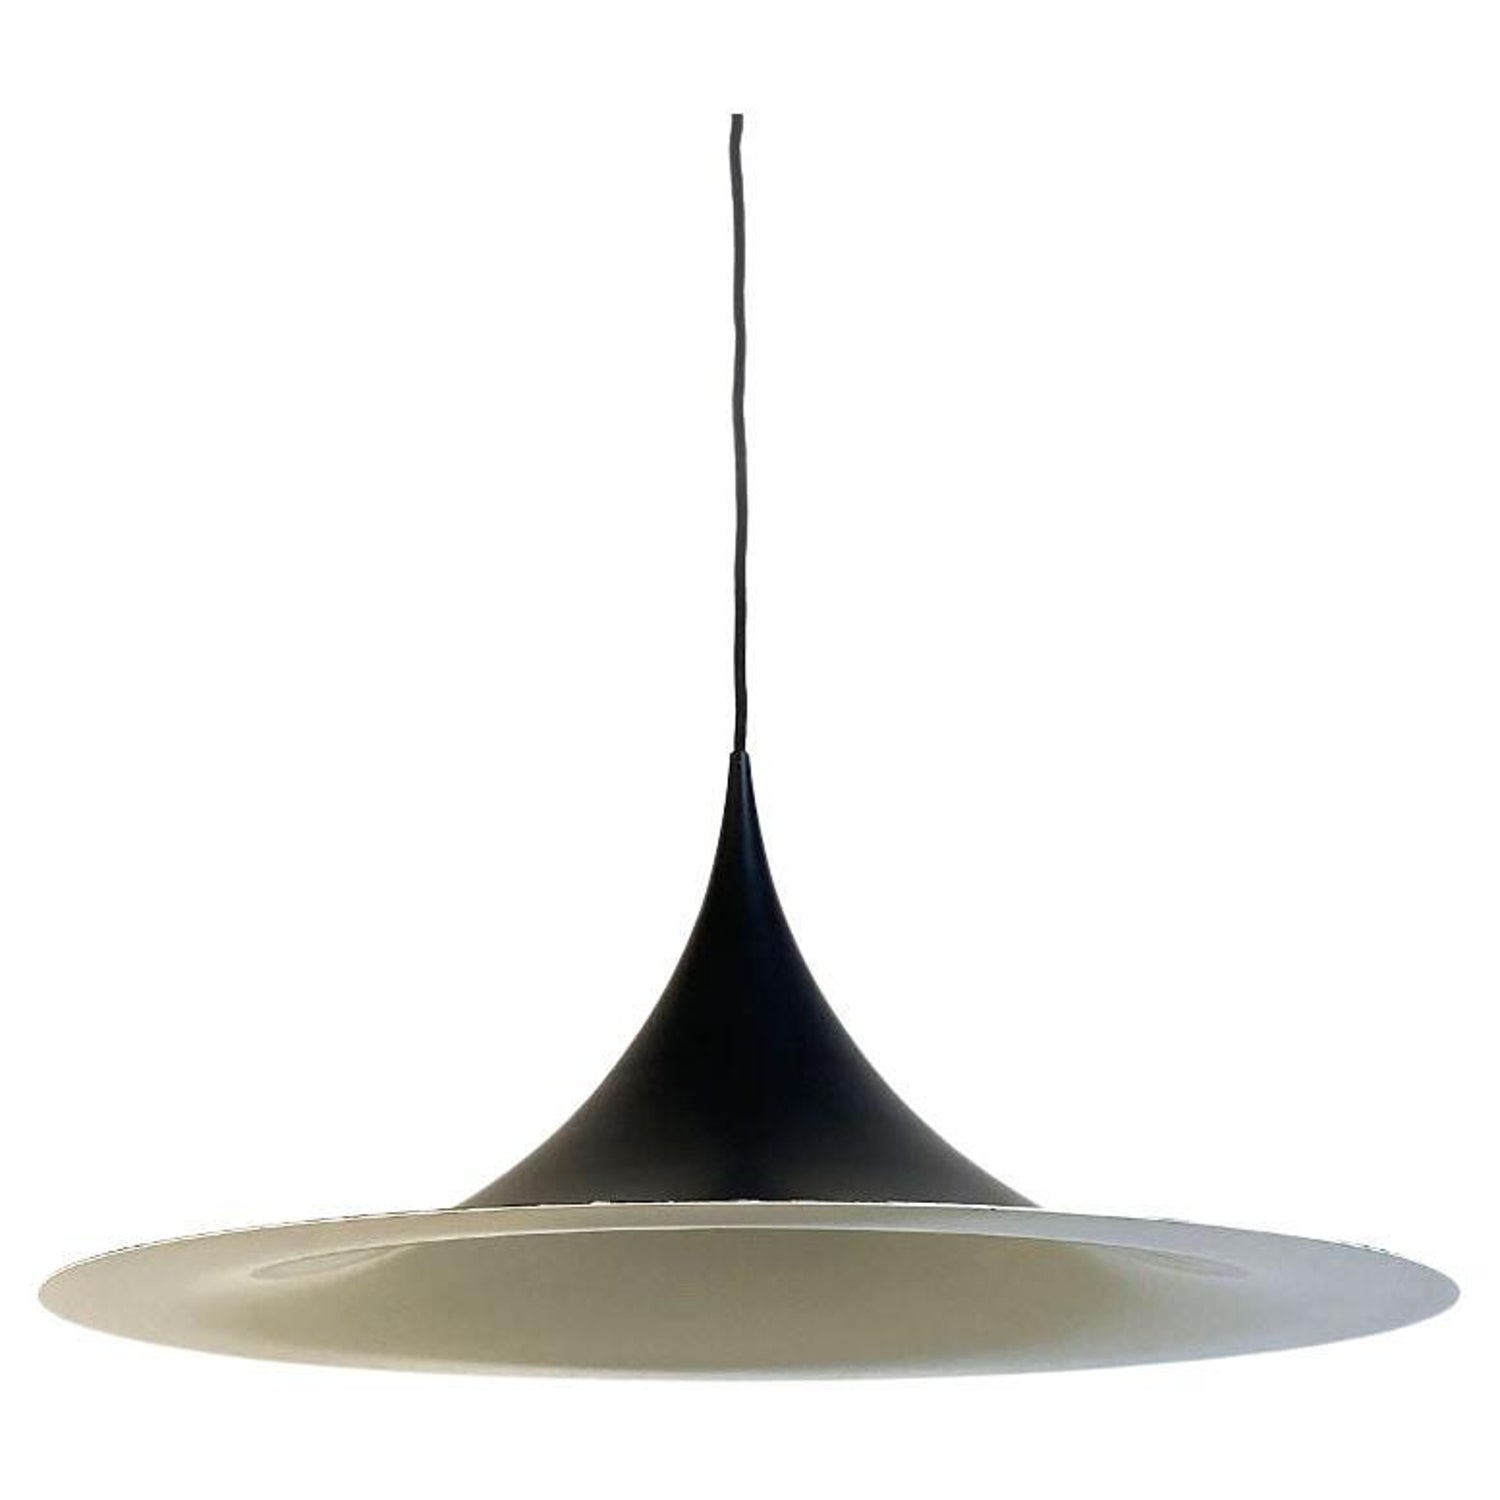 Danish Modern Semi Lamp by Claus Bonderup and Torsten Thorup for Fog and  Mørup, 1958 at 1stDibs